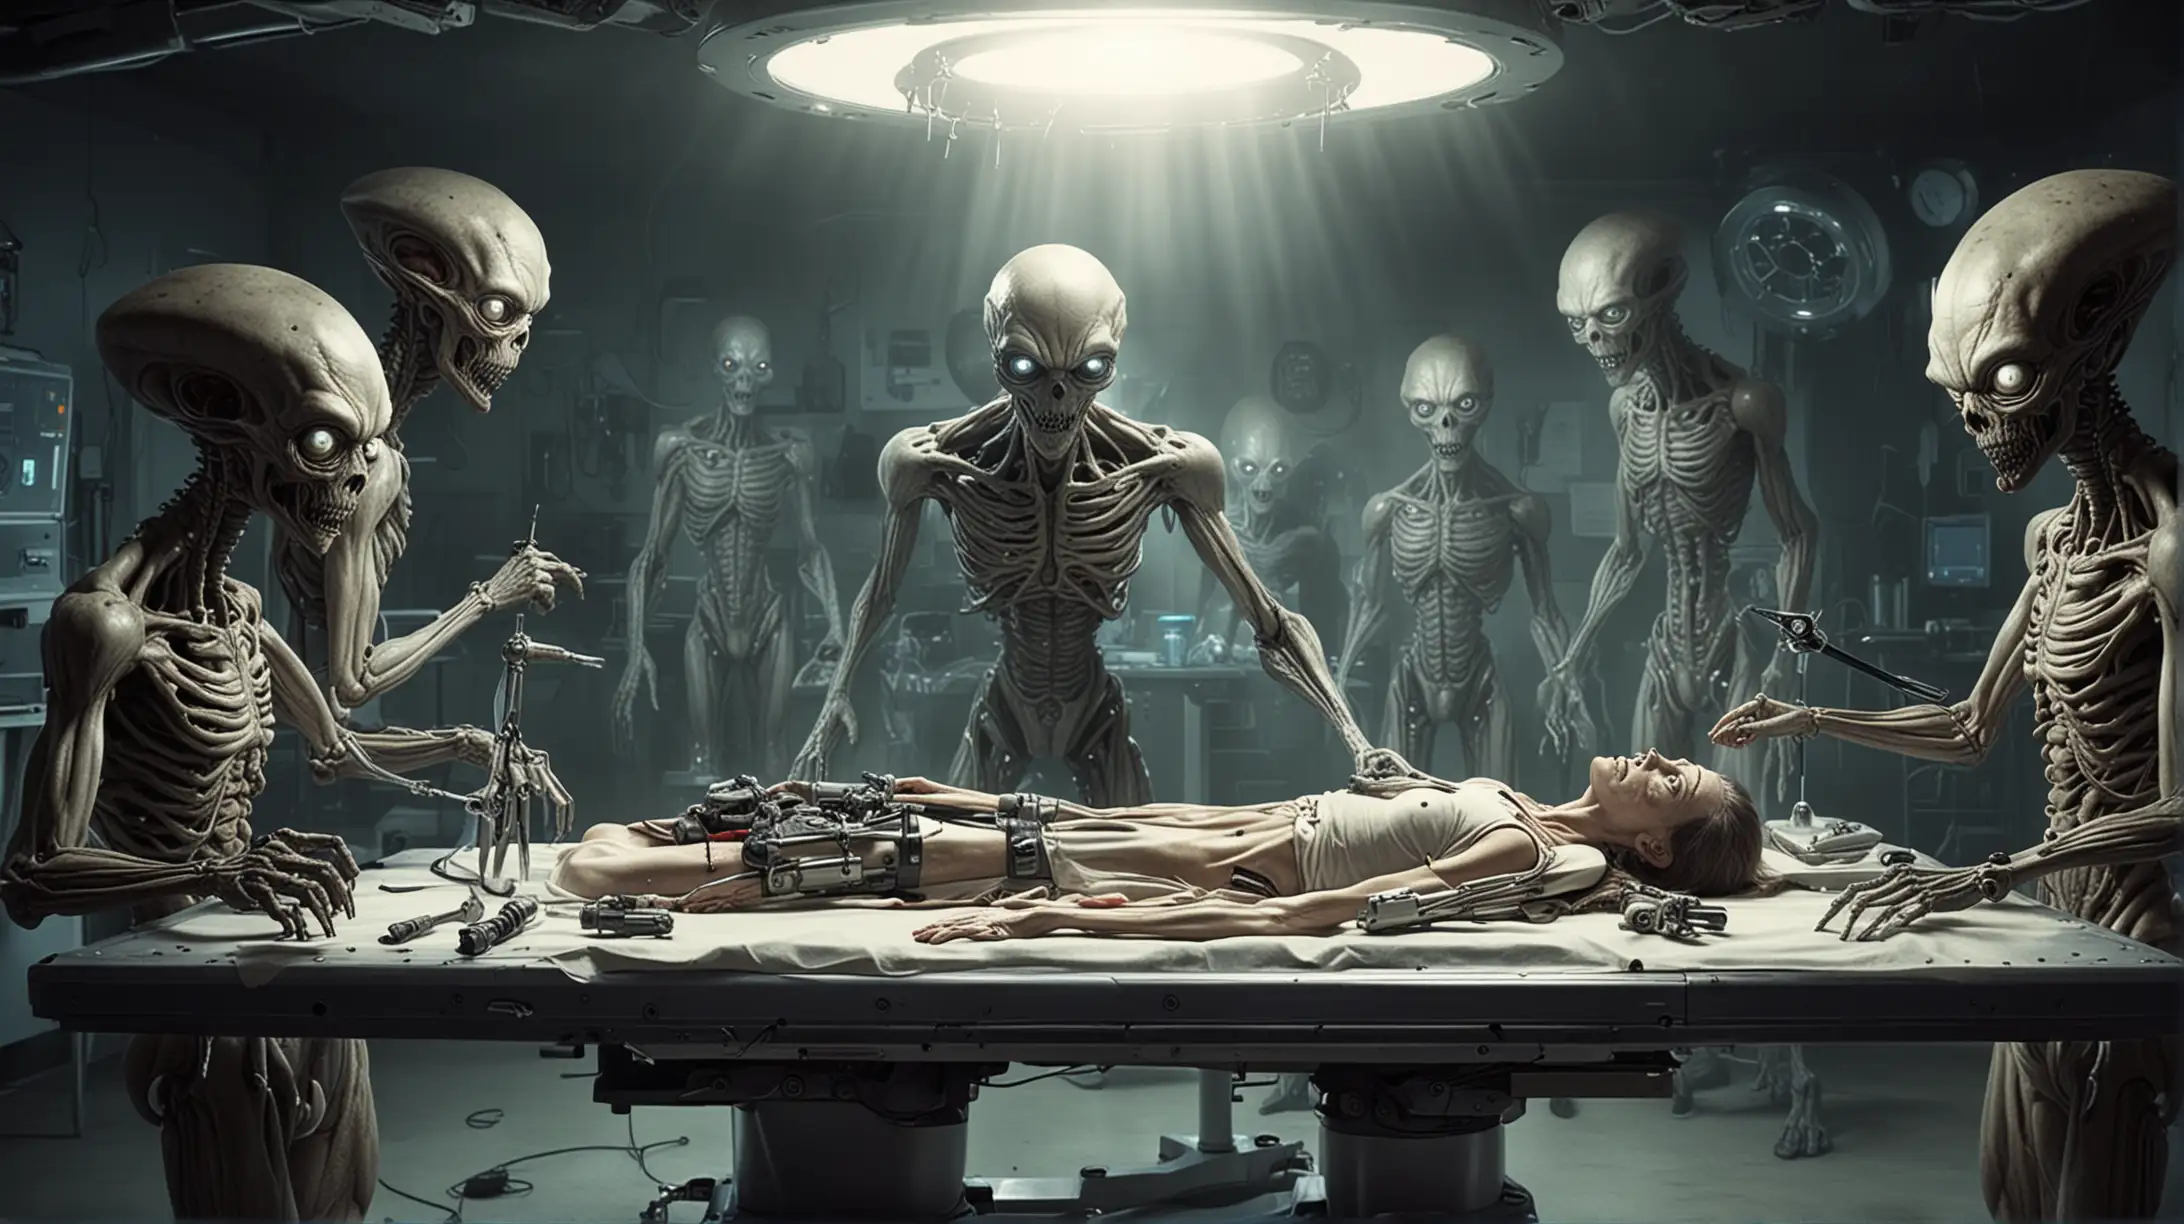 UFO Abductee on Operating Table with Scary Aliens